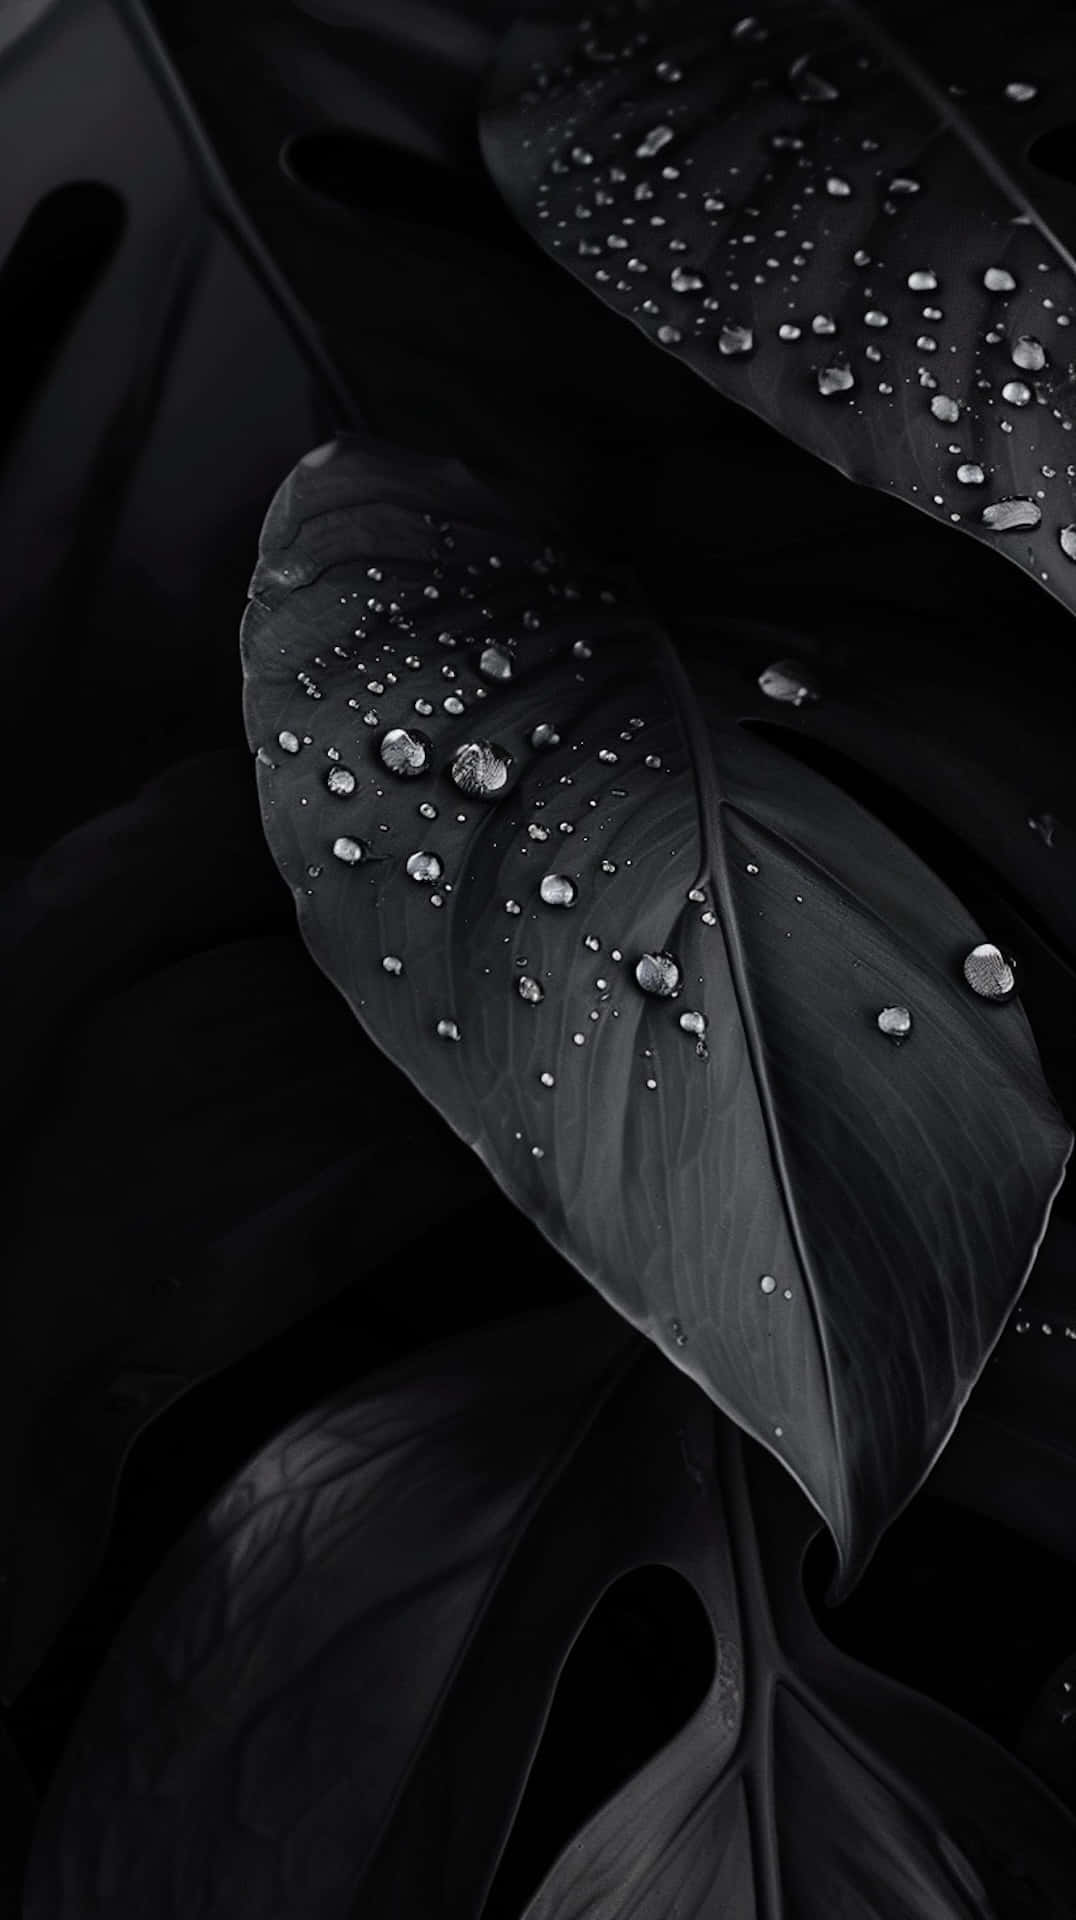 Black Leaveswith Water Droplets Wallpaper